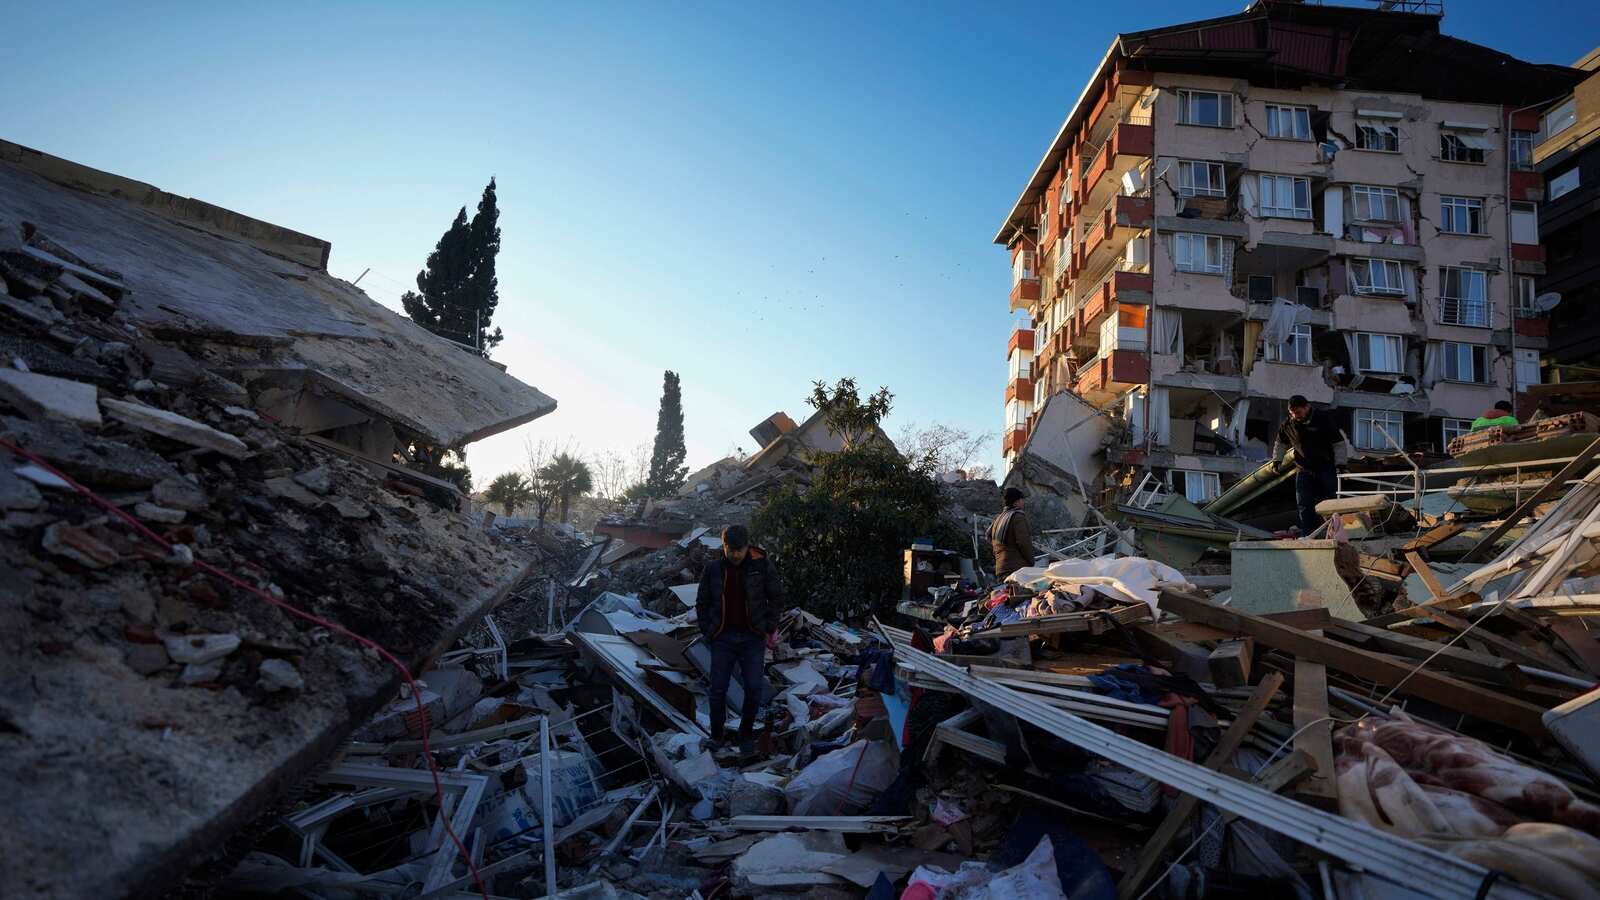 Earthquake death toll in Turkey, Syria exceeds 15,000 | World News